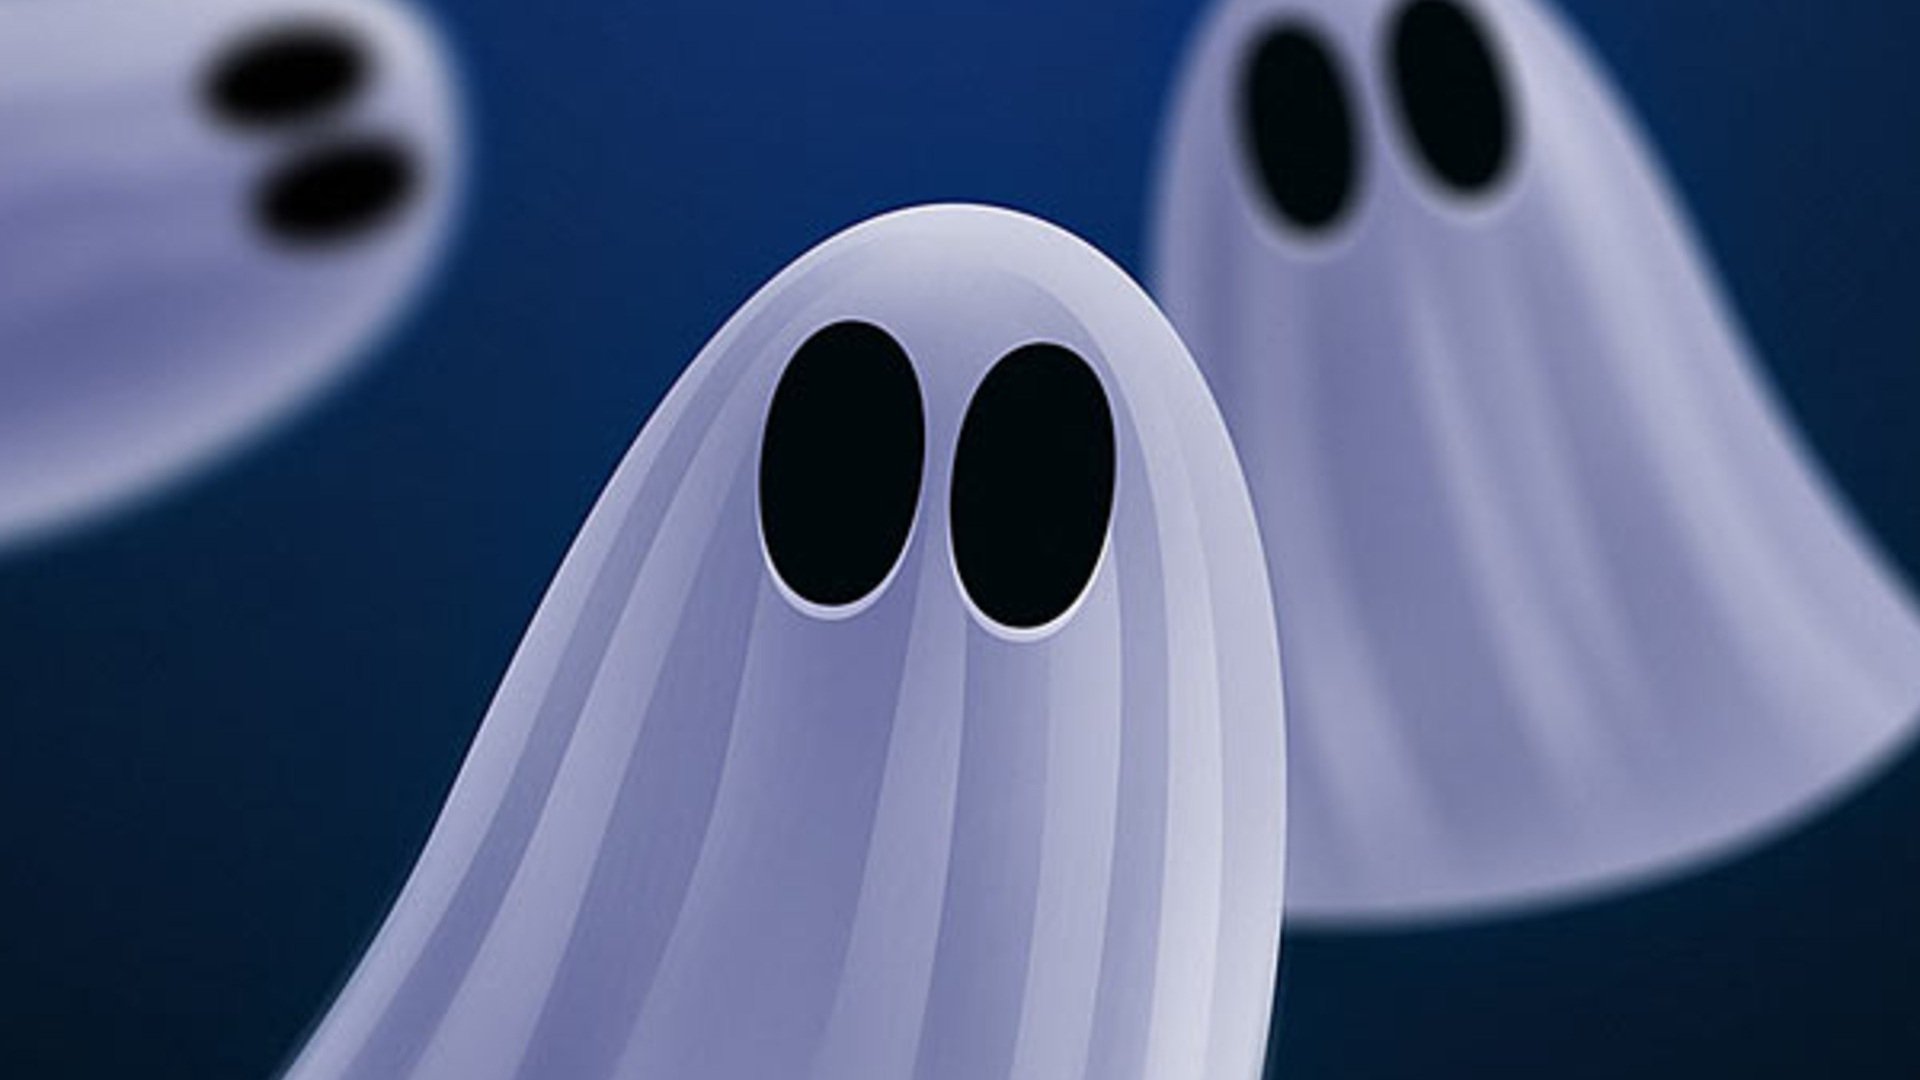 Spooky Ghosts ! Full HD Wallpaper and Background Image | 1920x1080 | ID